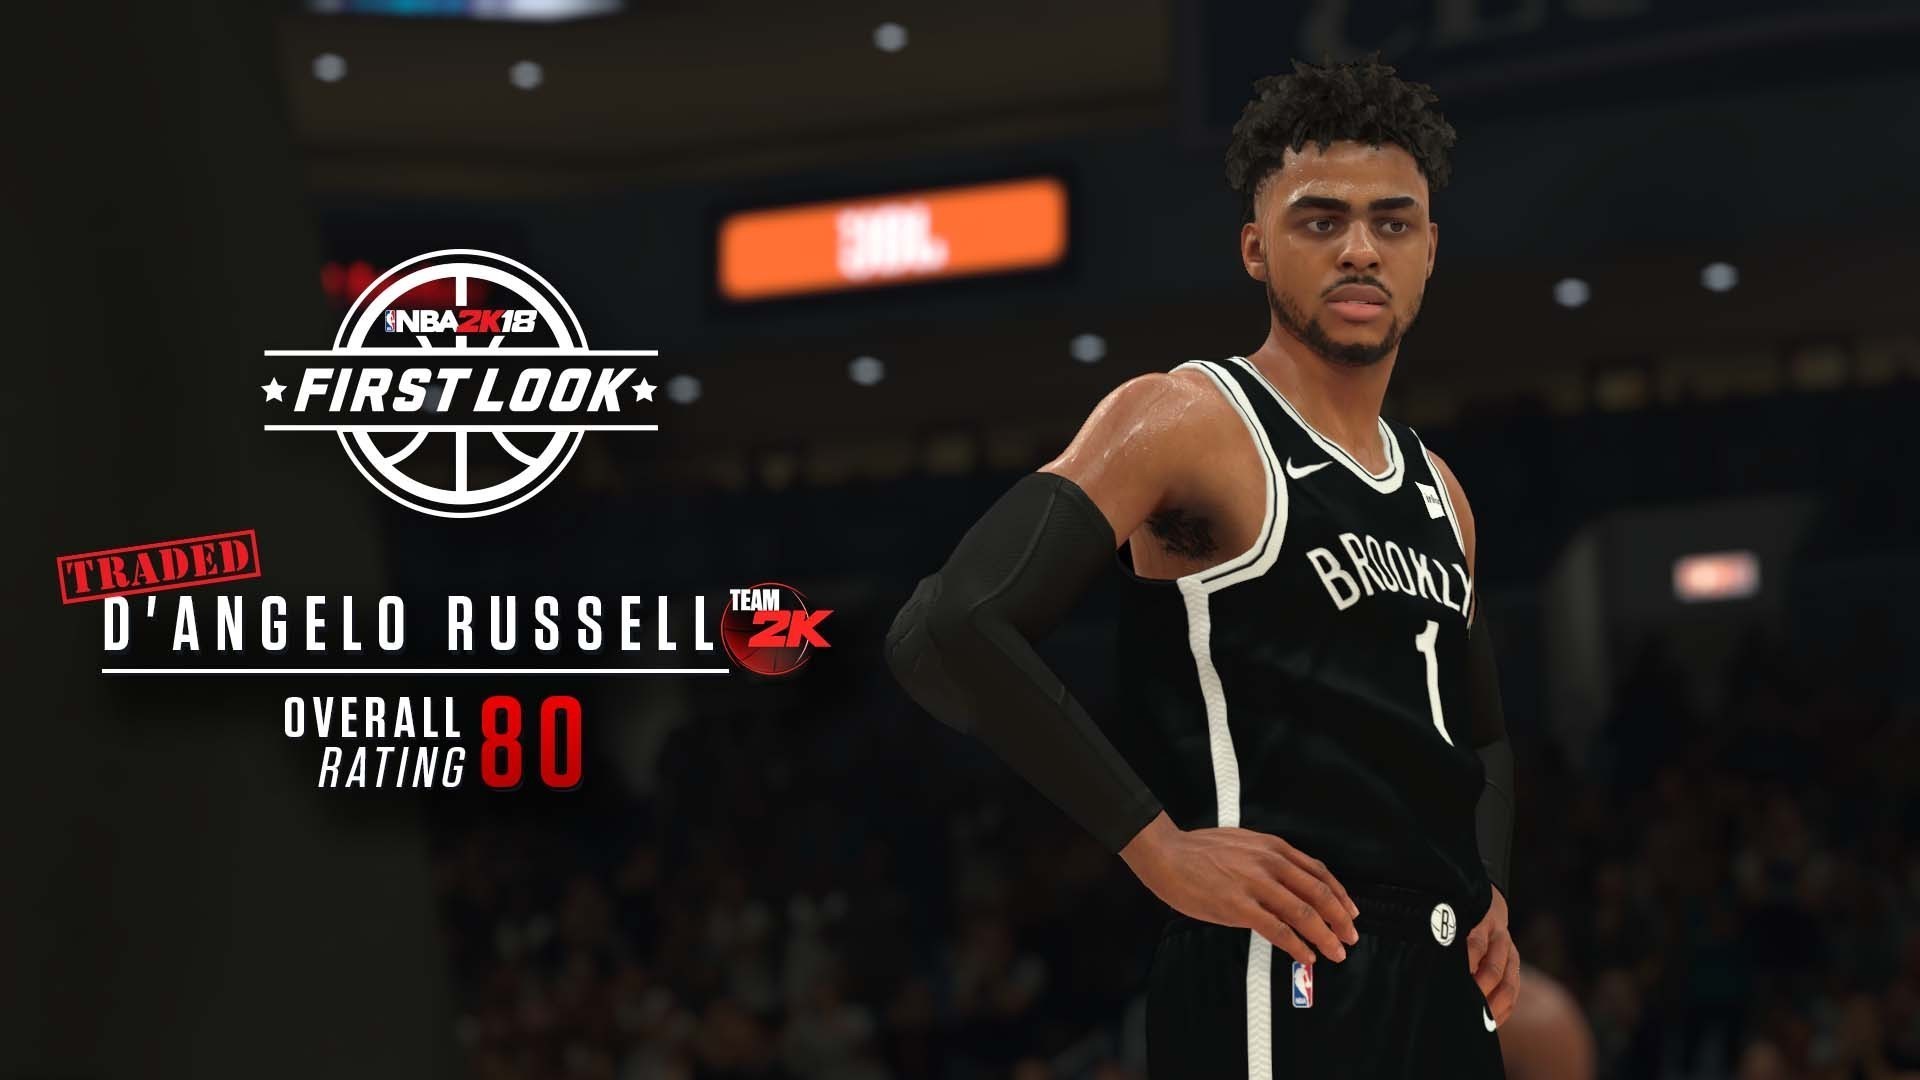 Nba 2k18 HD Wallpaper Image Pictures Photos Background